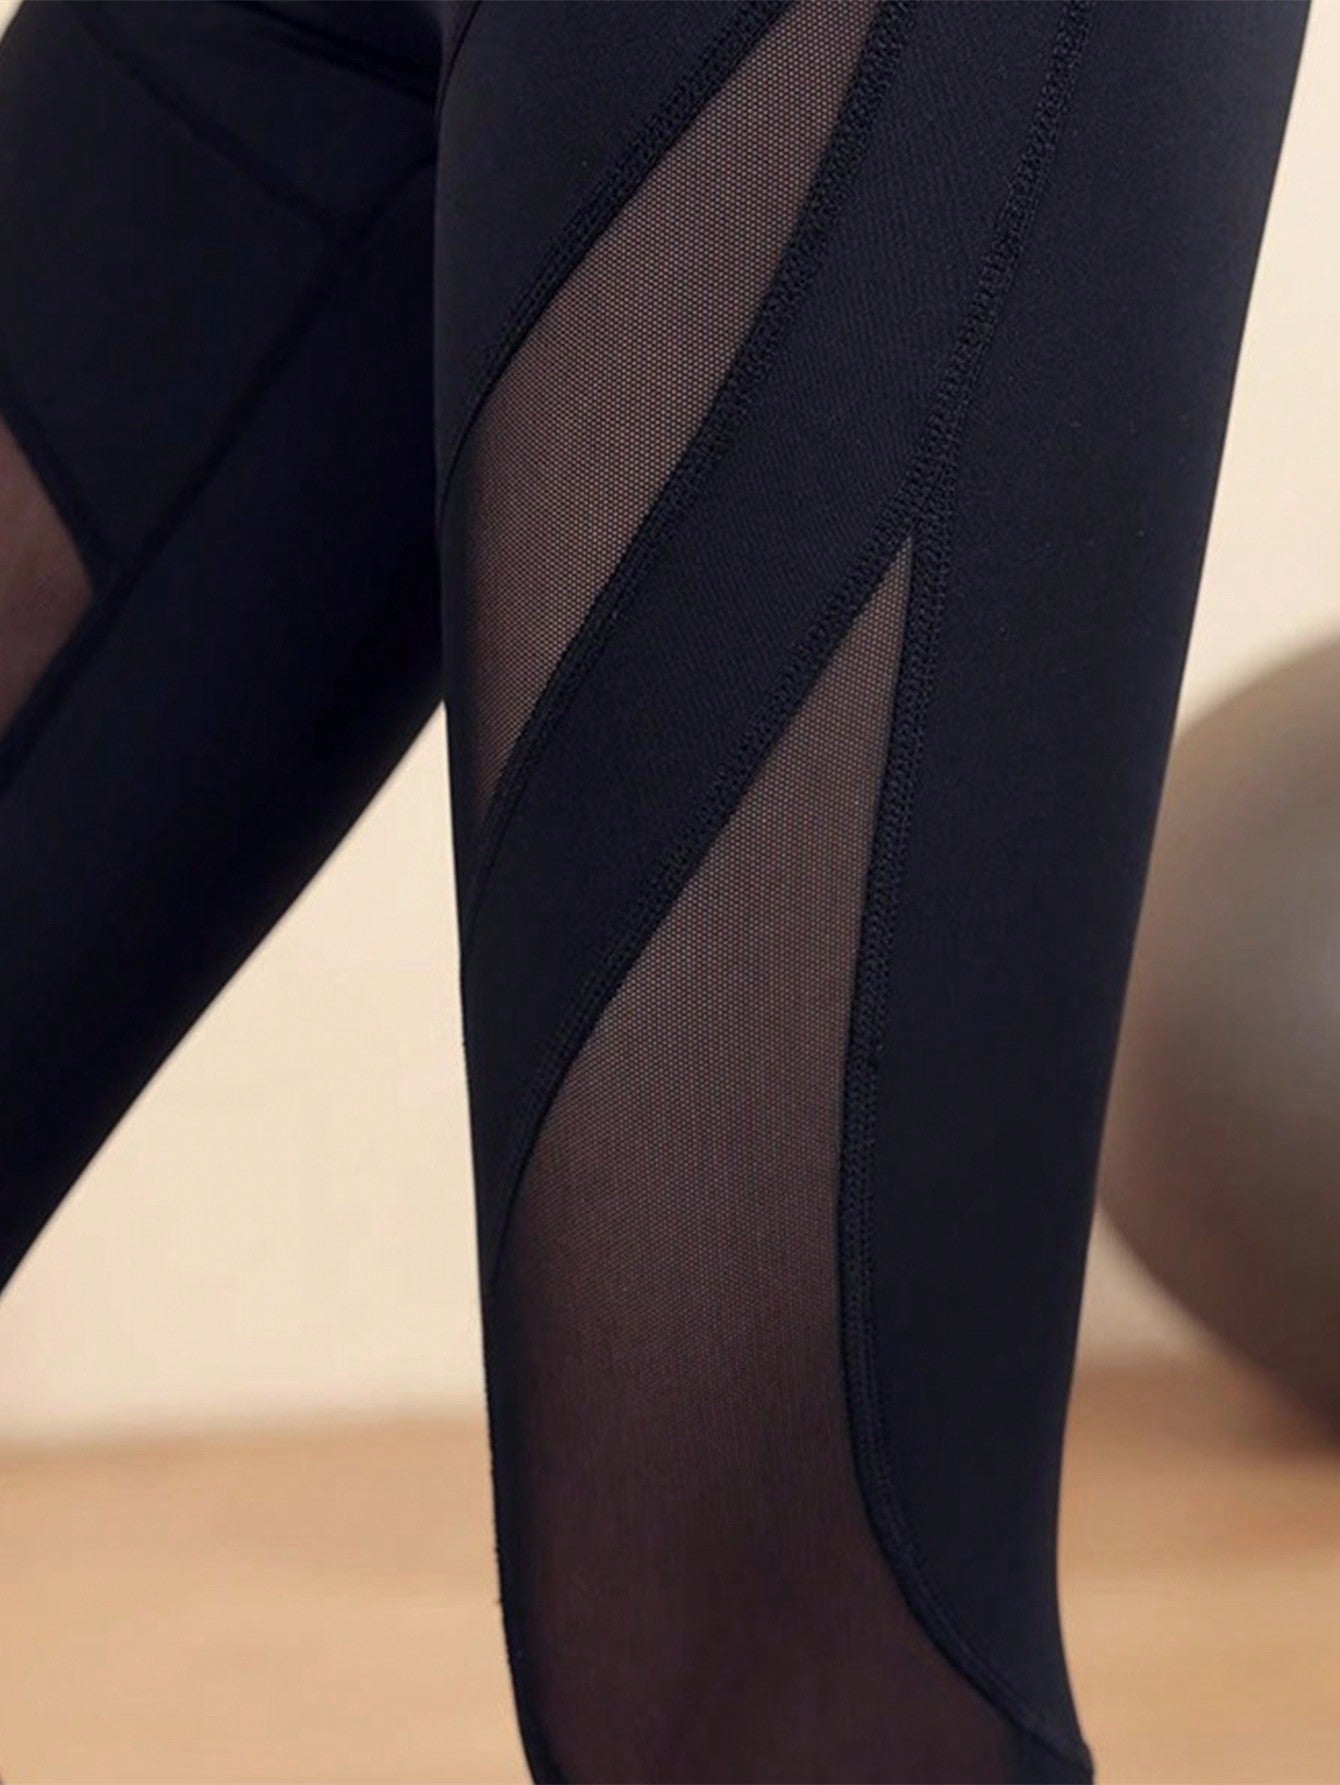 Contrast Mesh Wideband Waist Leggings: Stylish and Comfortable - Perfect for Workout and Beyond